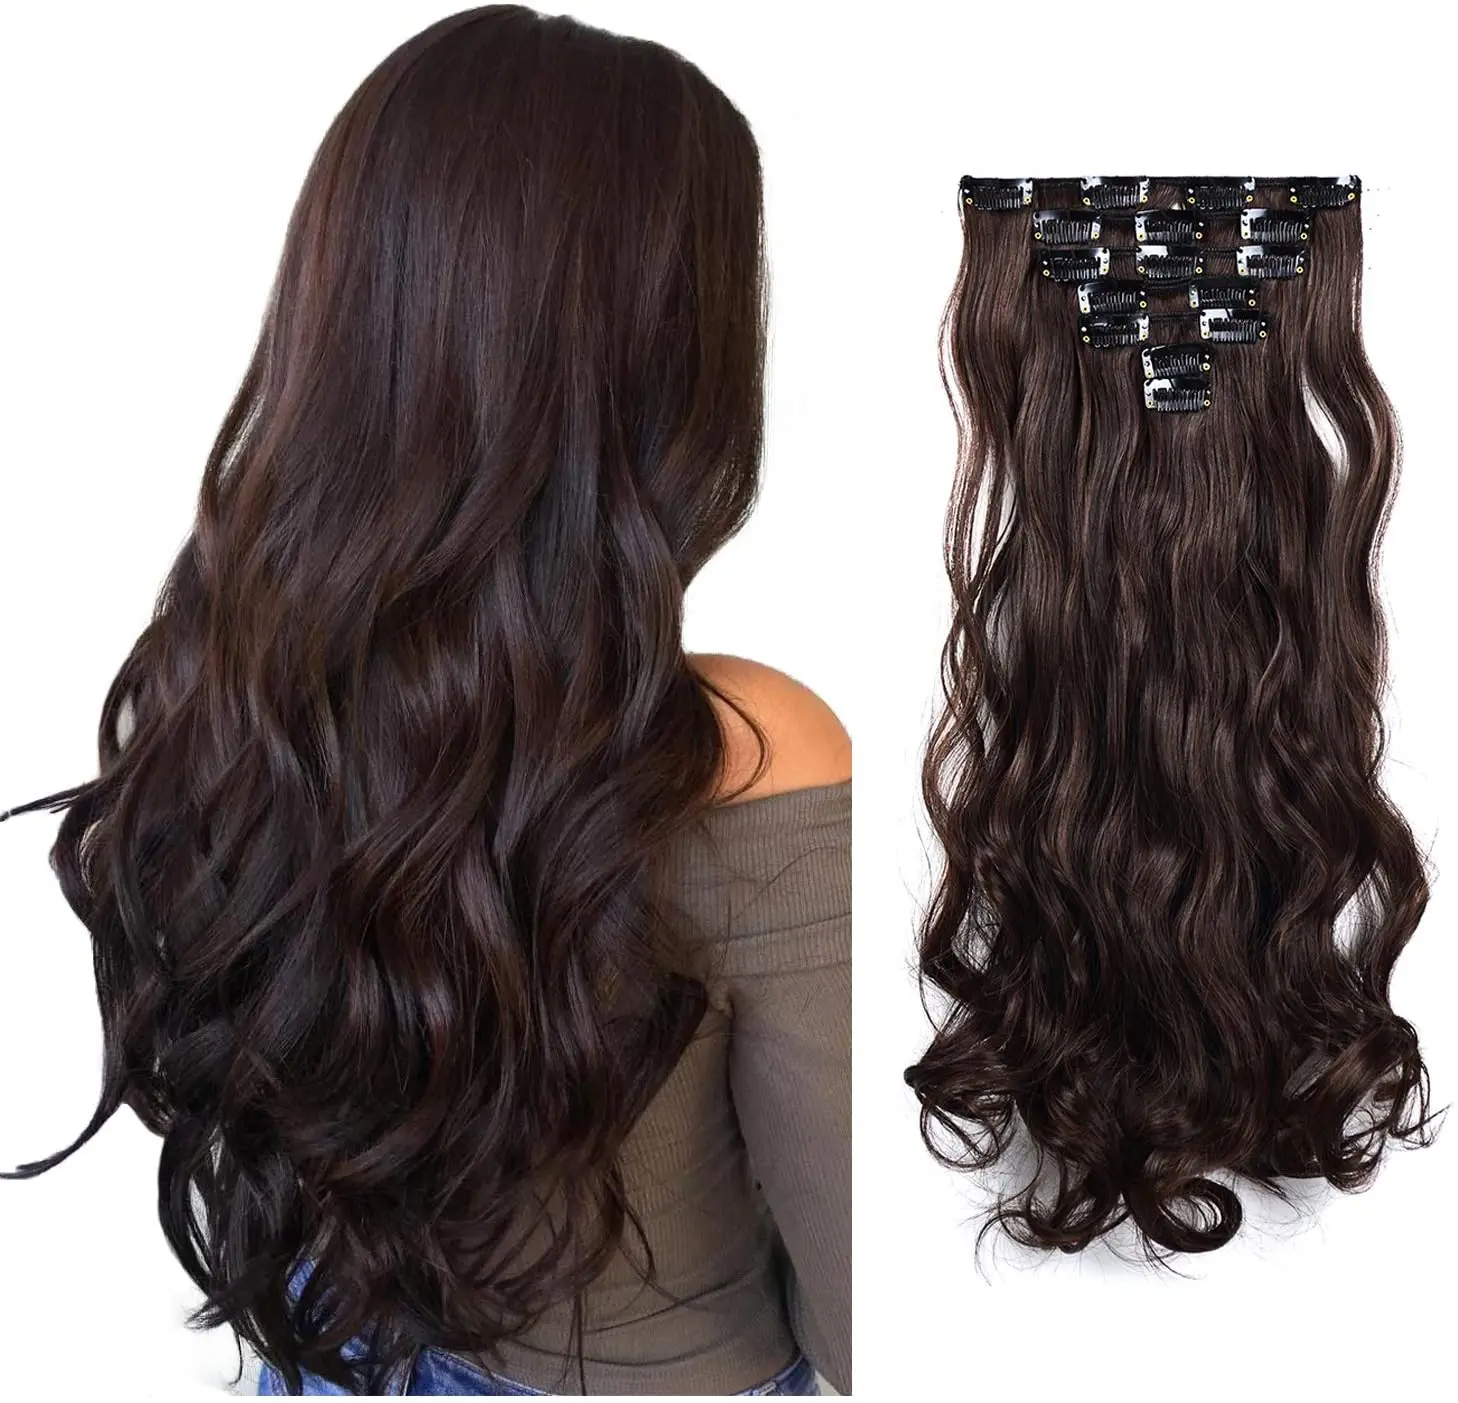 

Synthetic Clip On Hair Extension 7Pcs/Set 22" 140G Straight Hairpiece Curly 16 Clip In Hair Ombre Heat Resistant Fiber